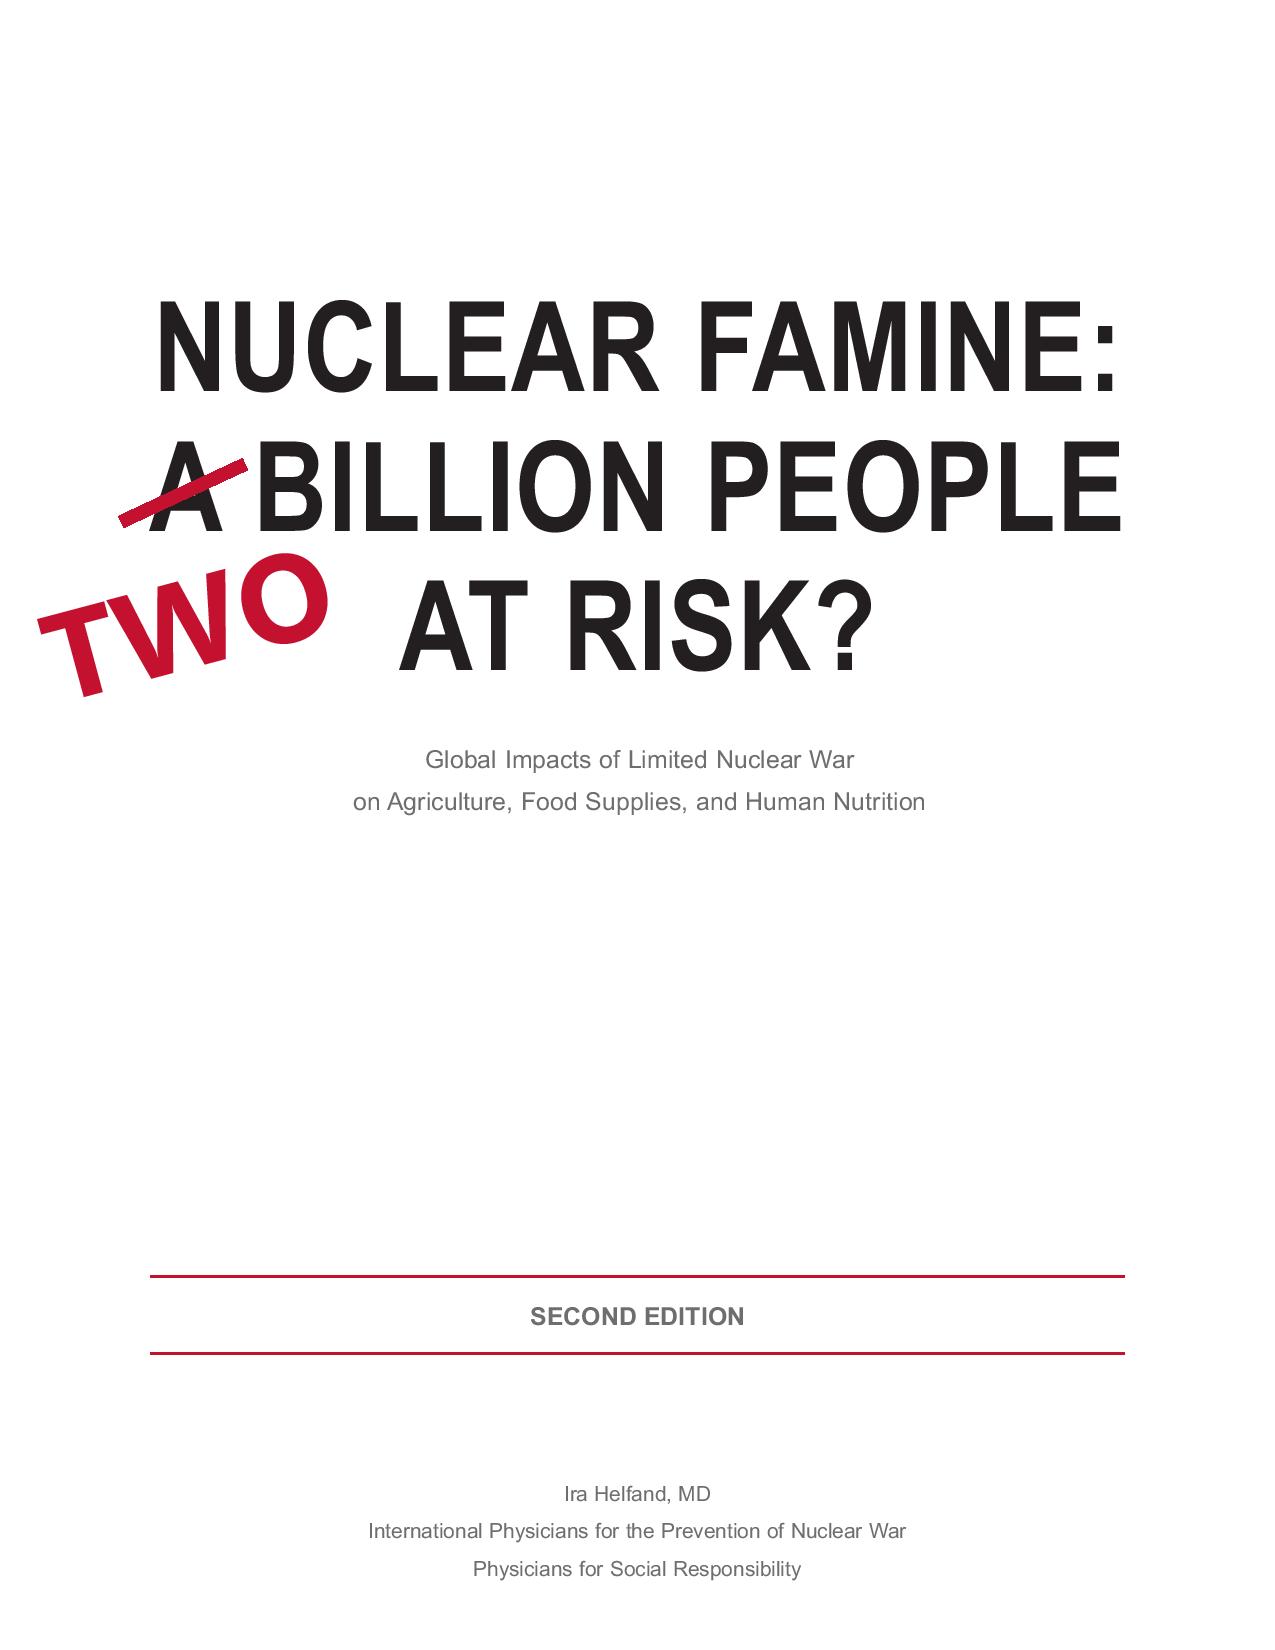 nuclear-famine-two-billion-at-risk-2013-page-001.jpg